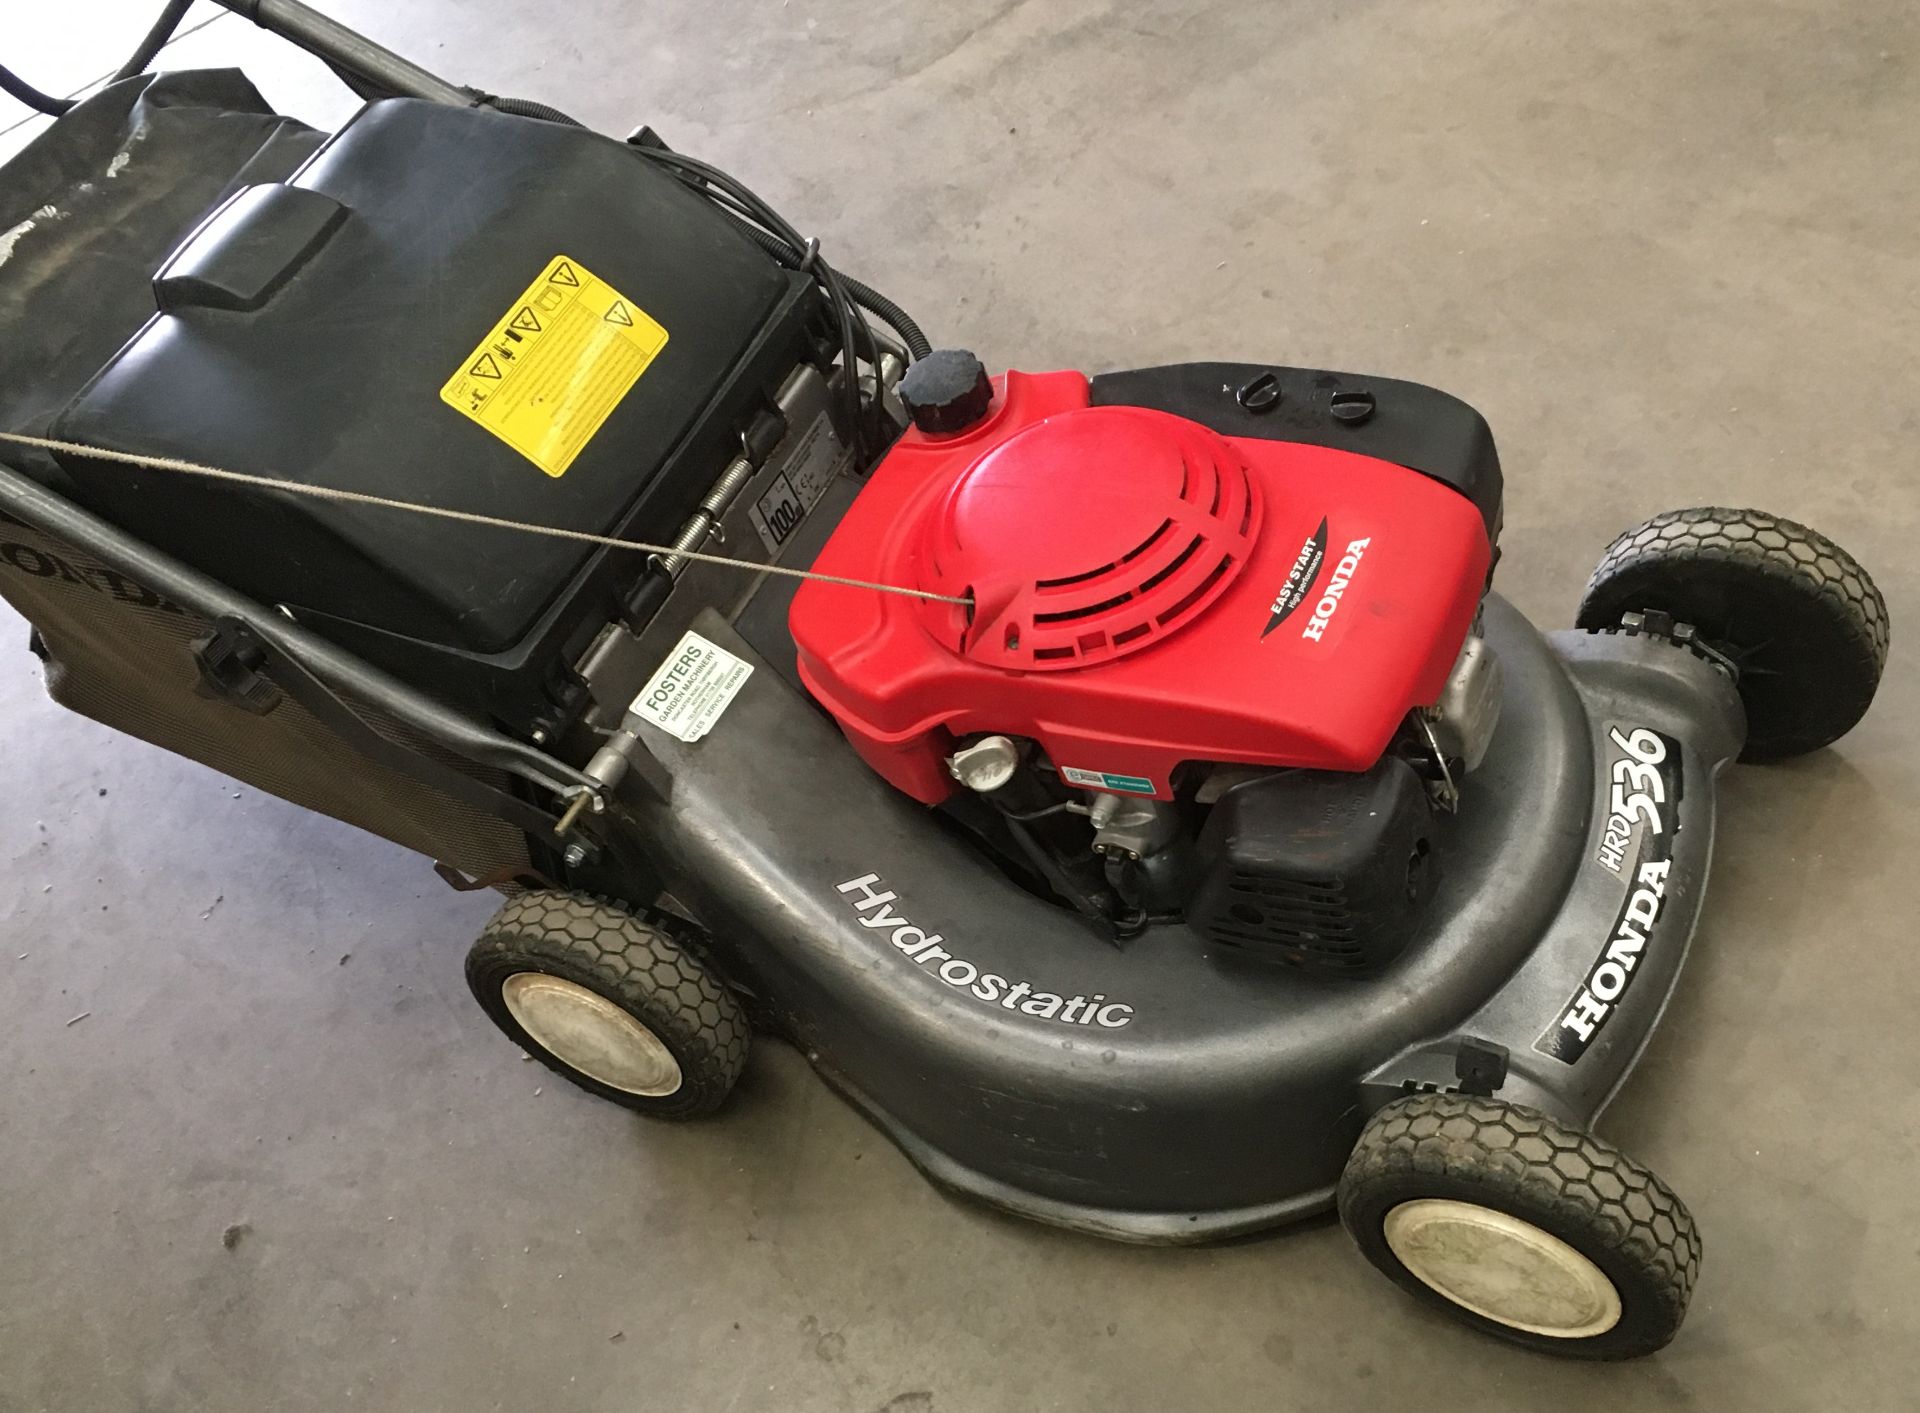 A Honda HRD 536 petrol rotary lawnmower with electric start, collection bag and manual.